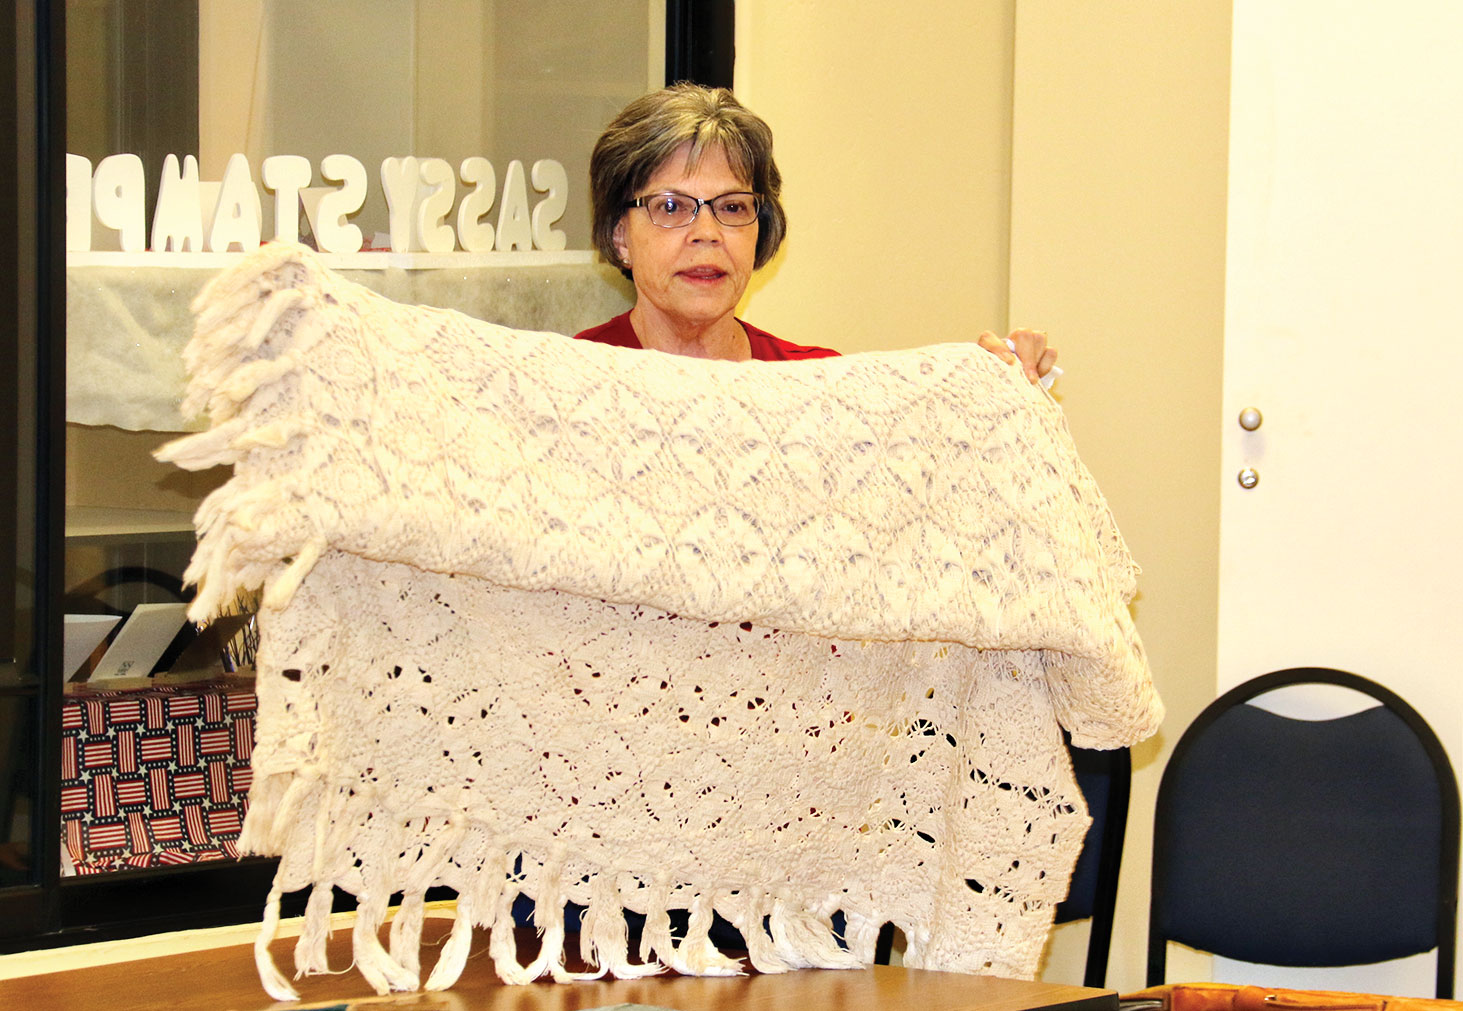 Karen Solomon showing handmade bedspread. Photo courtesy of Andy McConnell